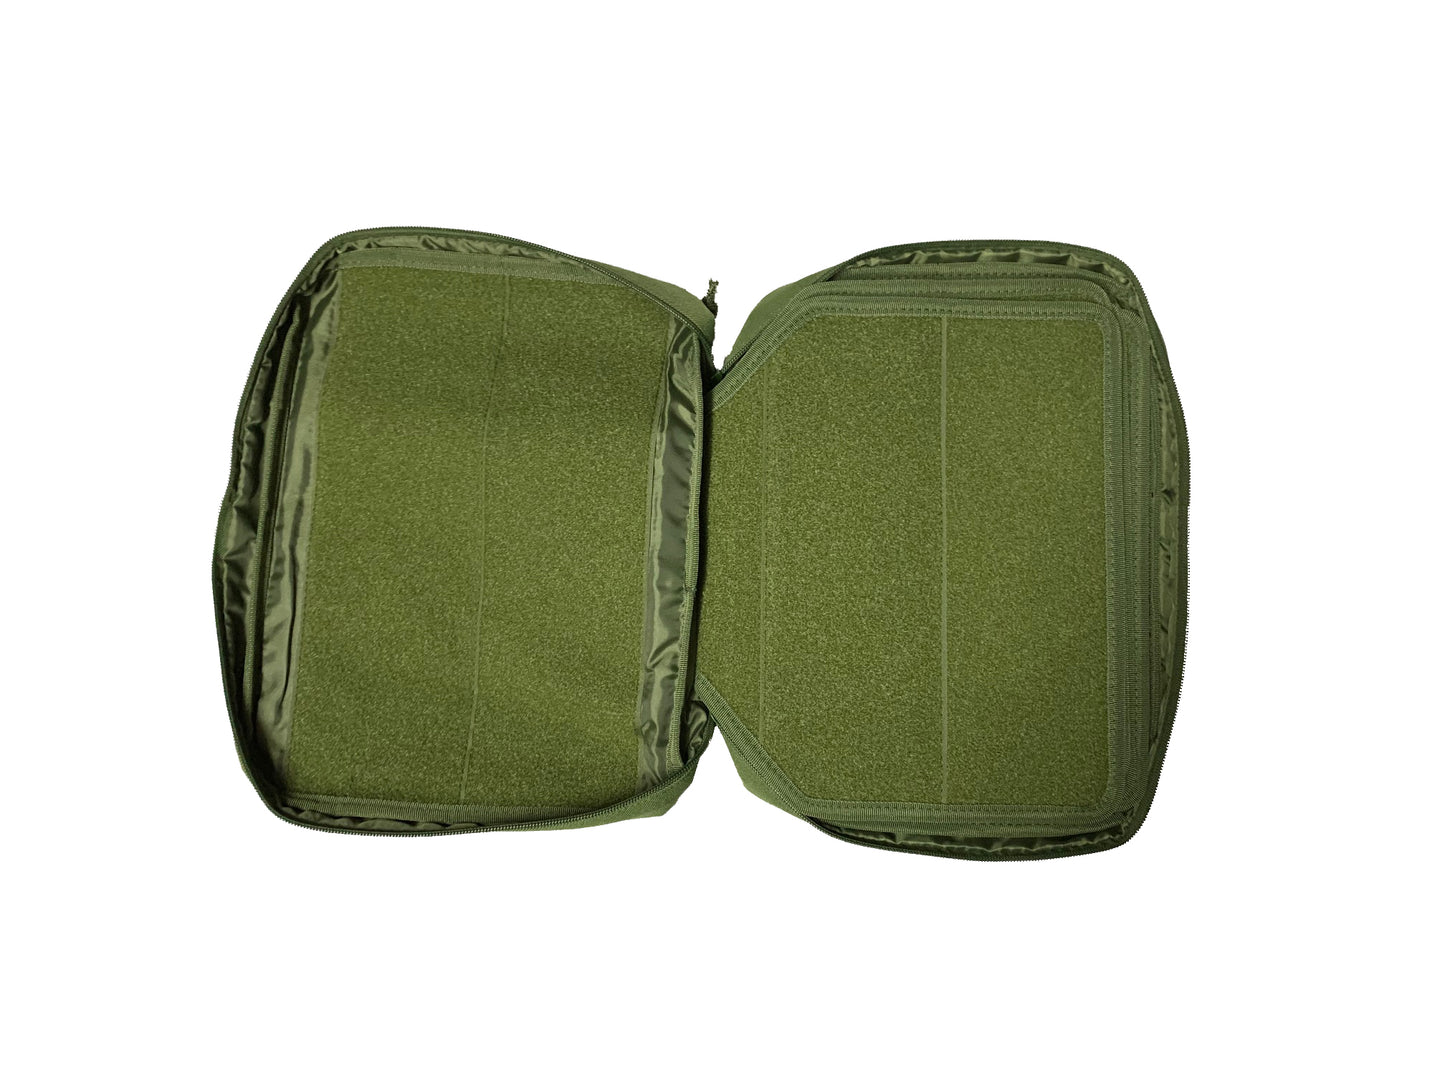 Take a look at the latest and greatest patch collectors bag.  Made from 1000D material with carry handles and also has a side zip pouch to carry any spare items you may require.  Comes with 4 double sided pages plus pages on the edge of the bag making it an amazing 10 pages, this will hold a great collection of your morale patches.